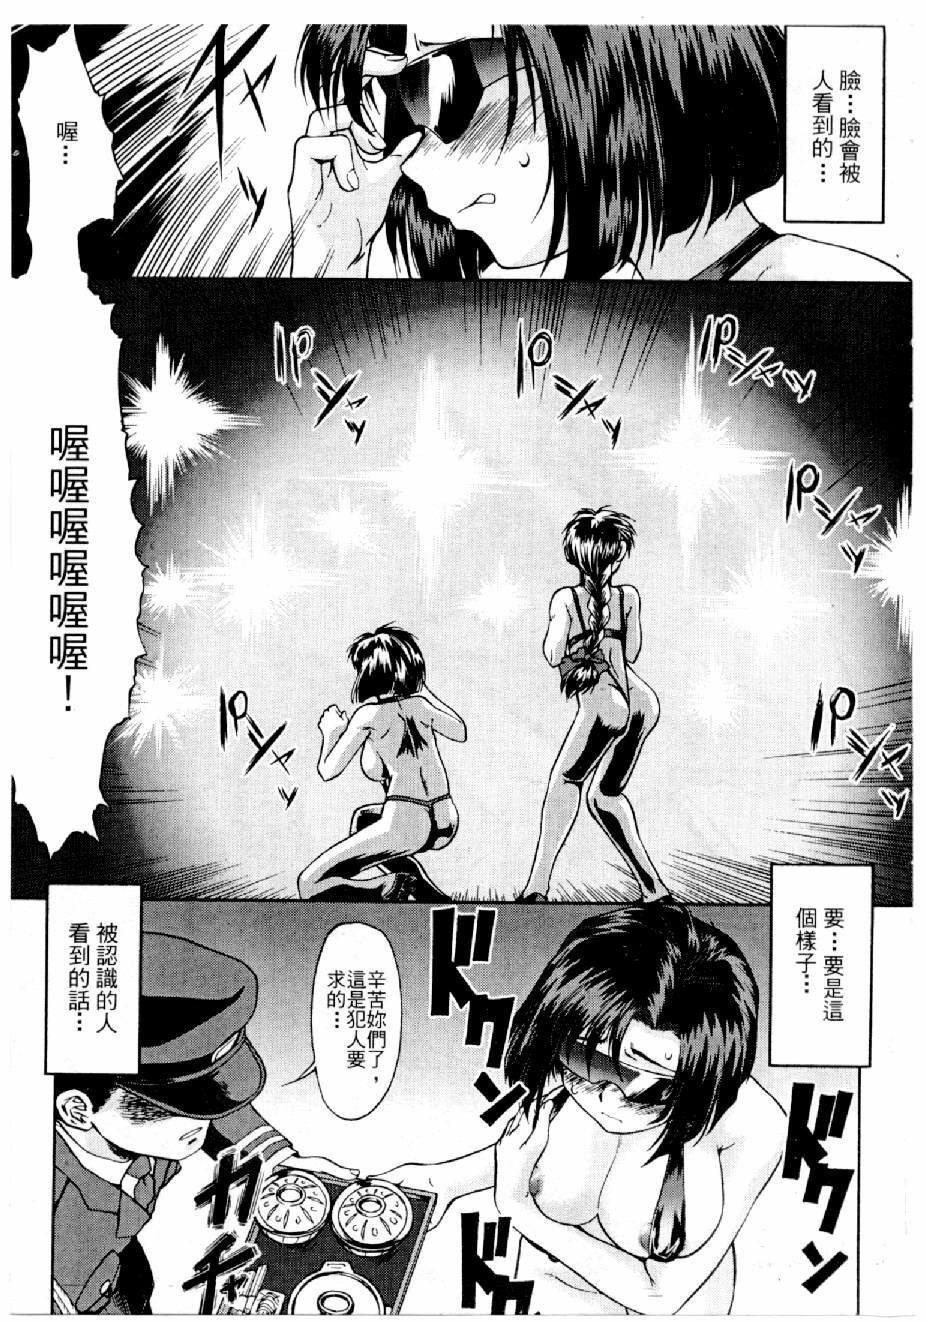 [Mizuno Kei] Cutie Police Woman 2 (You're Under Arrest) [Chinese] page 6 full